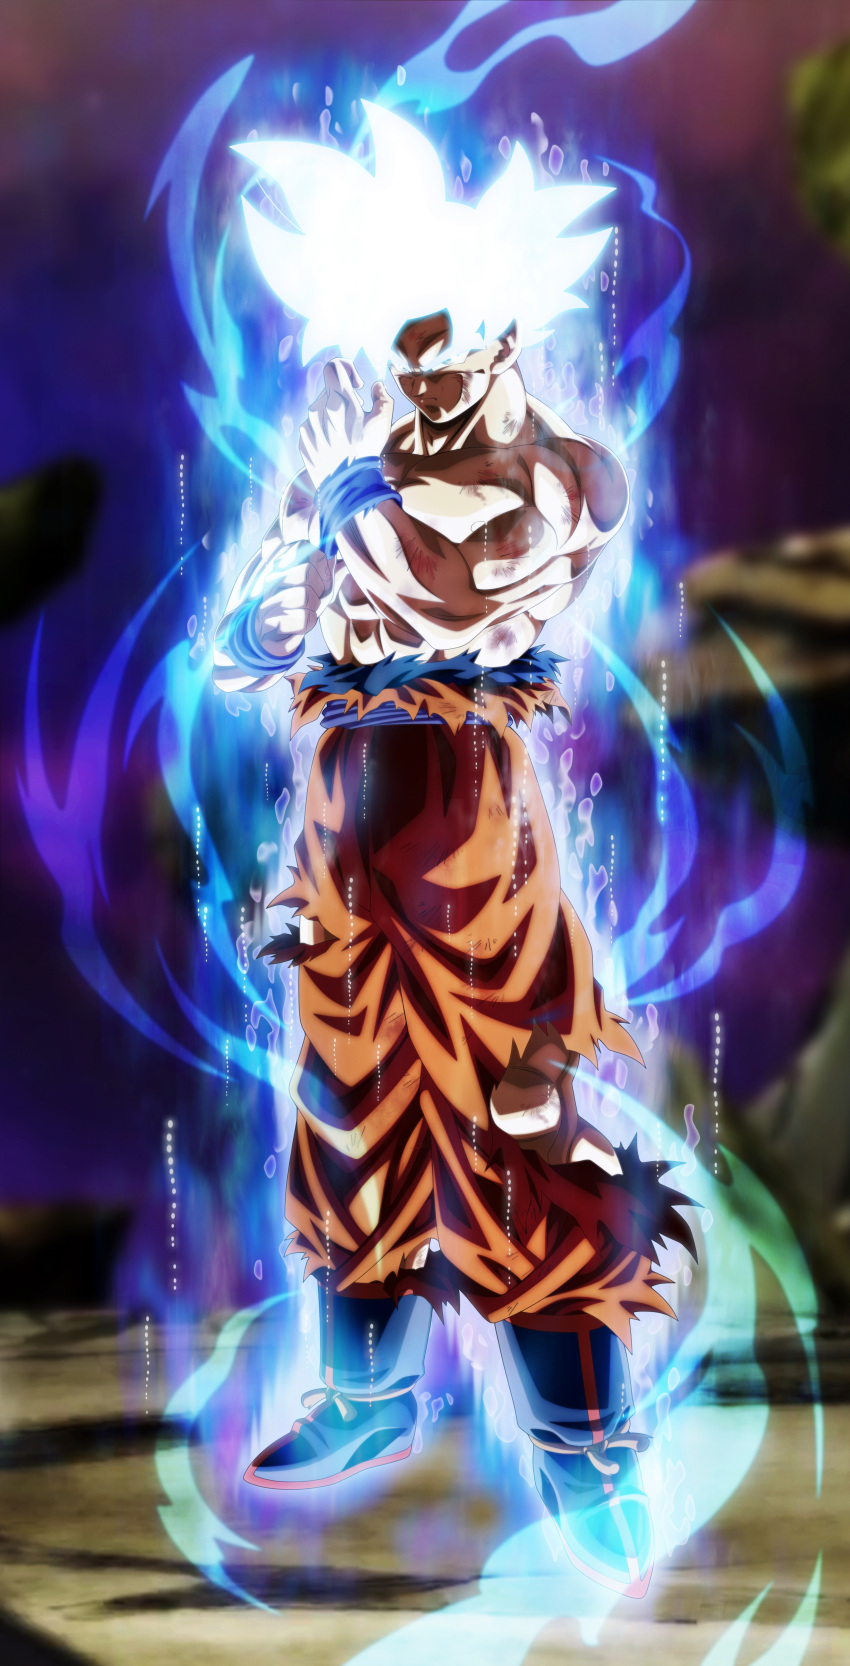 1boy abs absurdres aura blue_eyes blue_hair boots commentary dragon_ball dragon_ball_super dragonball_z full_body glowing glowing_eyes highres huge_filesize looking_at_viewer male_focus manly muscle nekoar resized serious shirtless solo son_gokuu spiky_hair spoilers torn_clothes ultra_instinct wristband you_gonna_get_raped